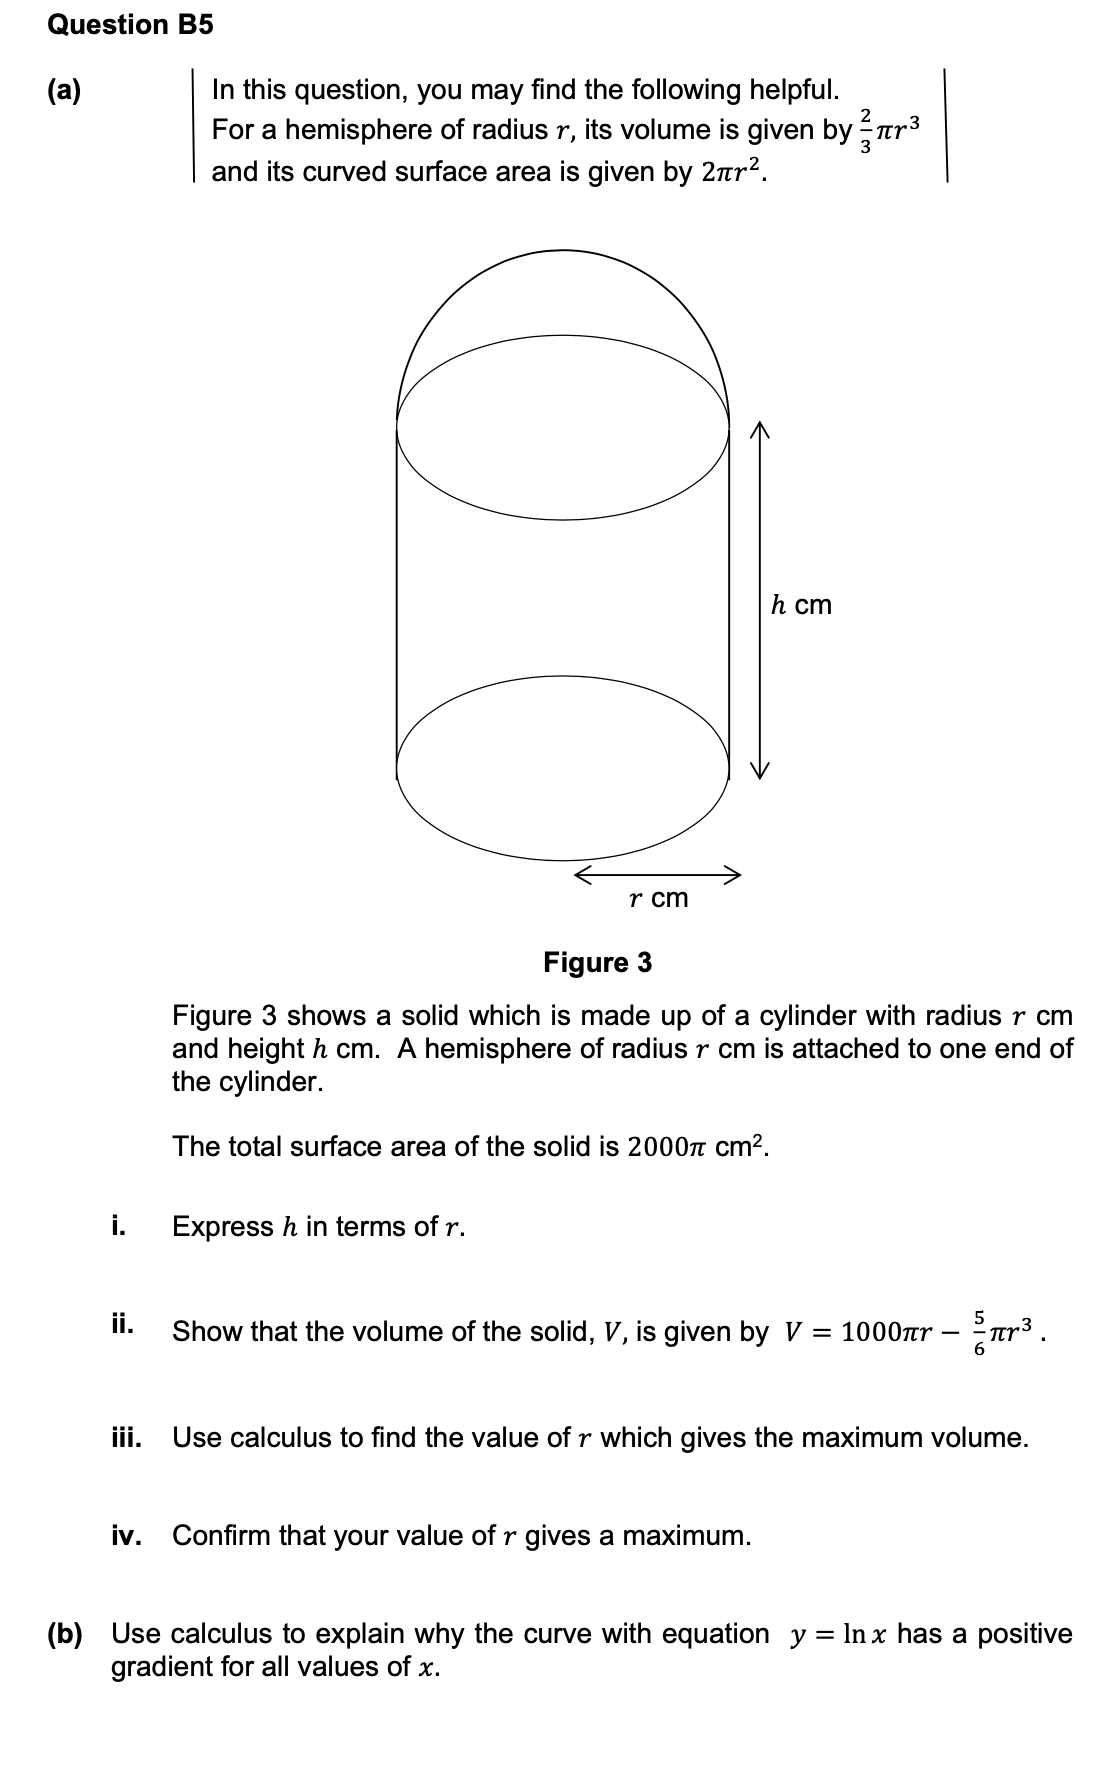 Question B5
In this question, you may find the following helpful.
For a hemisphere of radius r, its volume is given by ar3
and its curved surface area is given by 2nr?.
(а)
2
h cm
r cm
Figure 3
Figure 3 shows a solid which is made up of a cylinder with radius r cm
and height h cm. A hemisphere of radius r cm is attached to one end of
the cylinder.
The total surface area of the solid is 2000n cm?.
i.
Express h in terms of r.
ii.
5
Show that the volume of the solid, V, is given by V = 1000r
iii. Use calculus to find the value of r which gives the maximum volume.
iv. Confirm that your value of r gives a maximum.
(b) Use calculus to explain why the curve with equation y = lIn x has a positive
gradient for all values of x.
